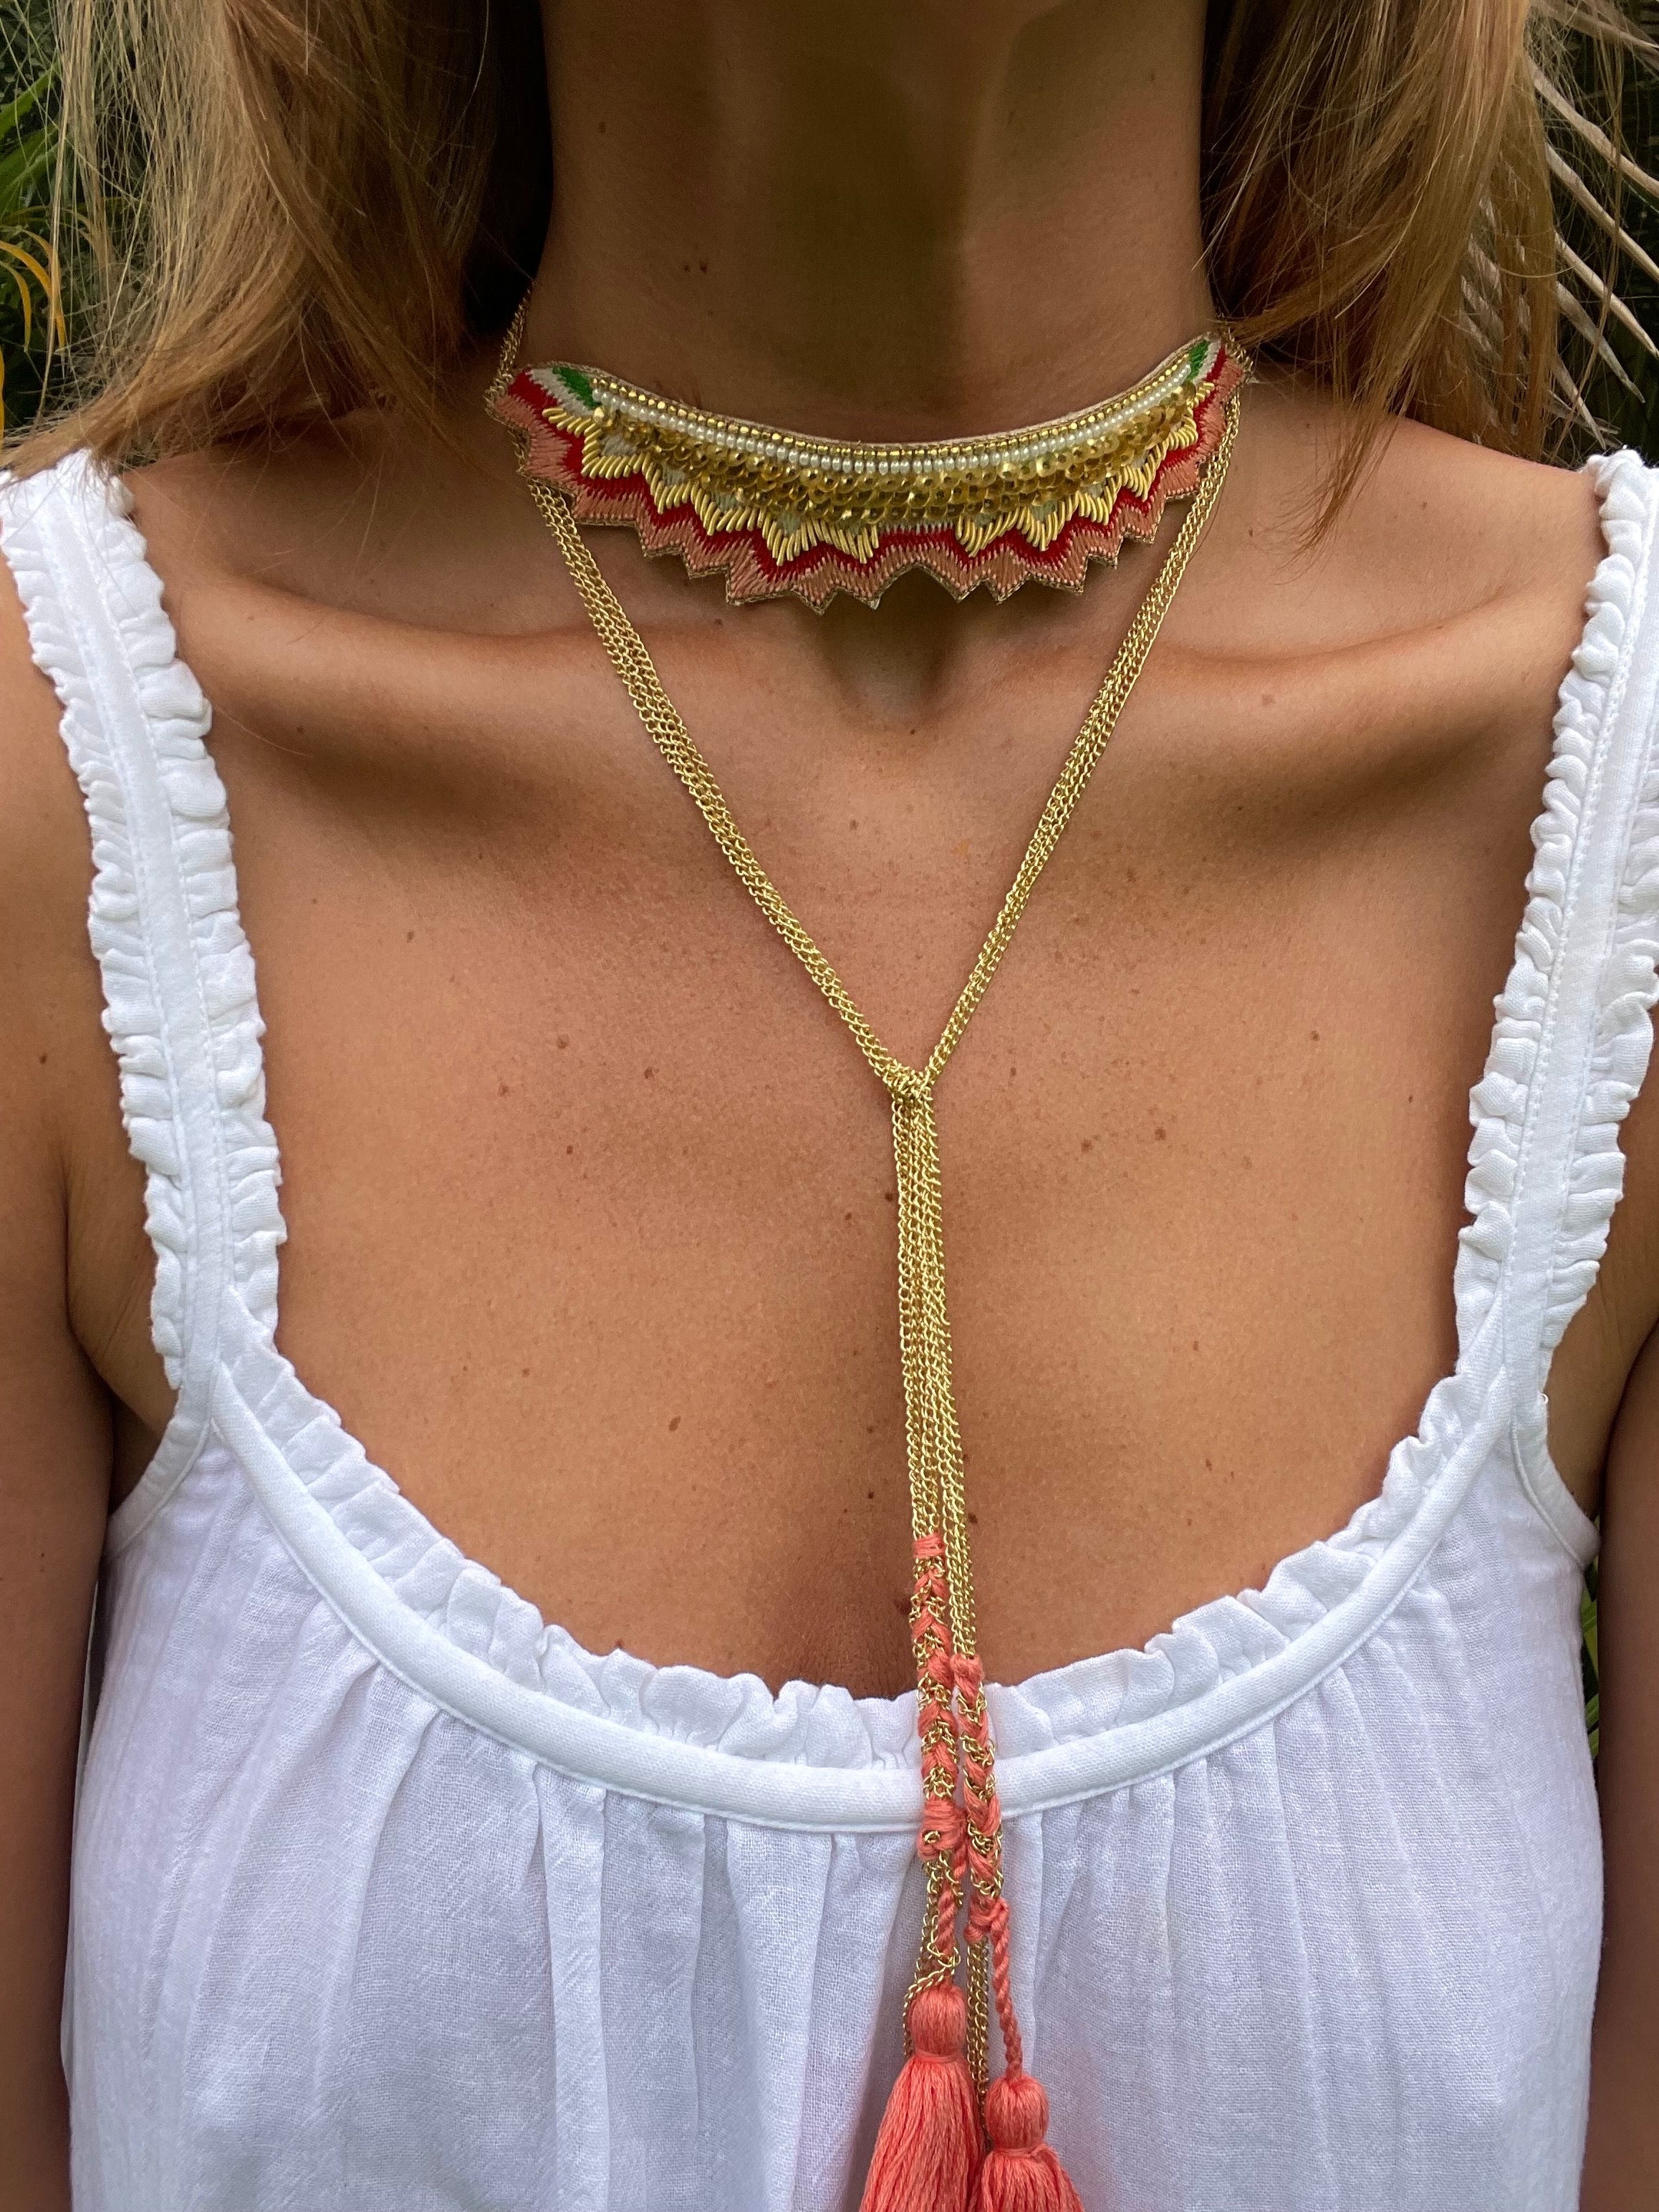 nahua official mahi necklace in peach green hand embroidered cuff wrap around and choker necklace